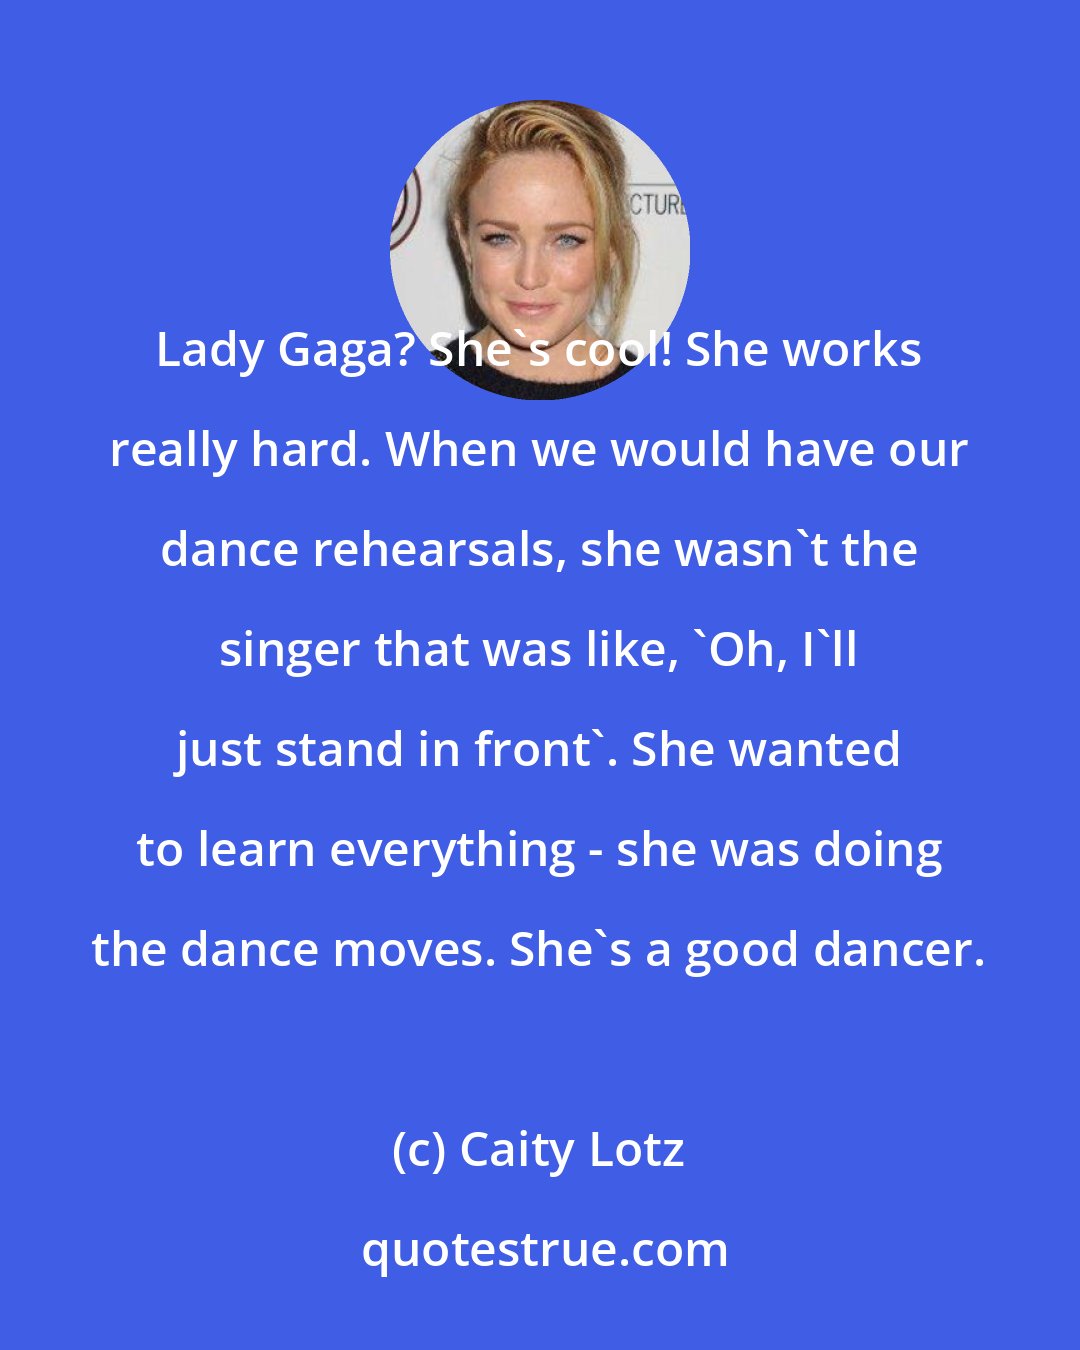 Caity Lotz: Lady Gaga? She's cool! She works really hard. When we would have our dance rehearsals, she wasn't the singer that was like, 'Oh, I'll just stand in front'. She wanted to learn everything - she was doing the dance moves. She's a good dancer.